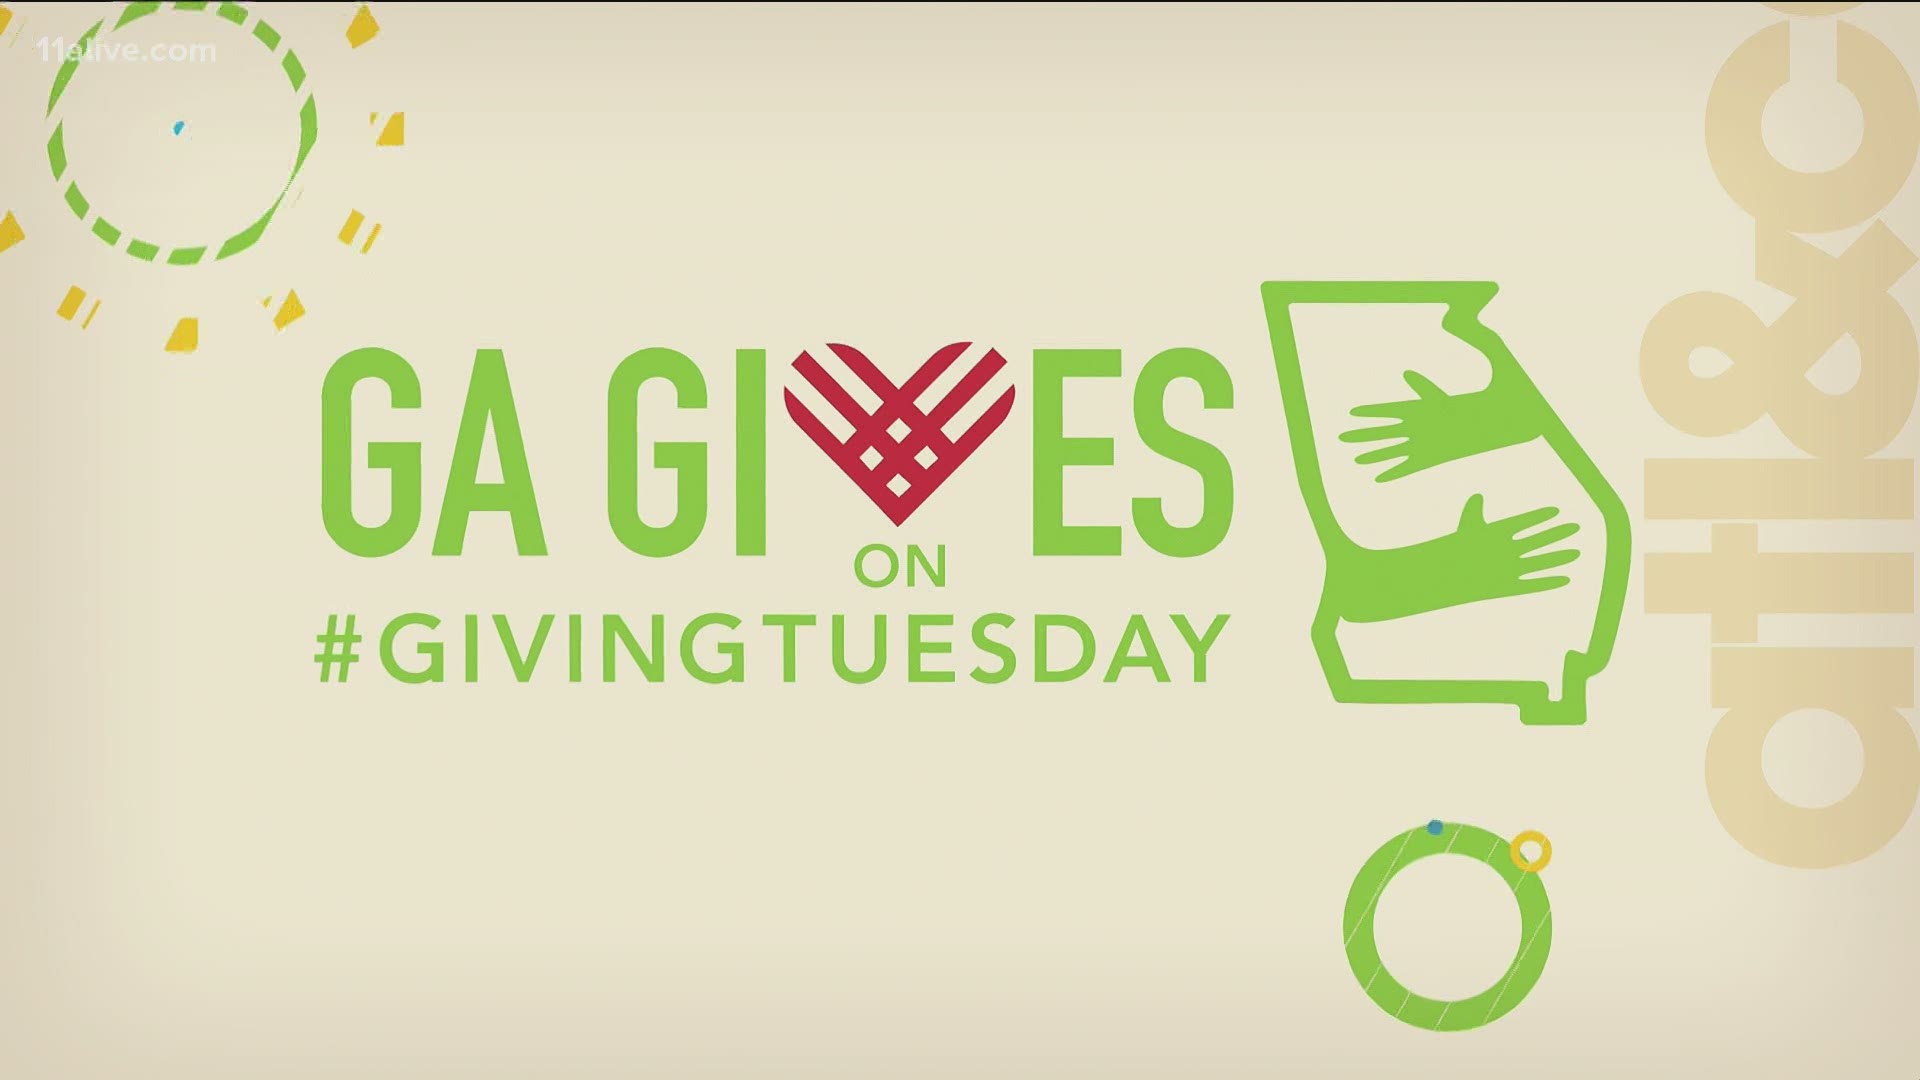 Learn about the Georgia Center for Nonprofits' inspiring mission and donate this Giving Tuesday at gagives.org